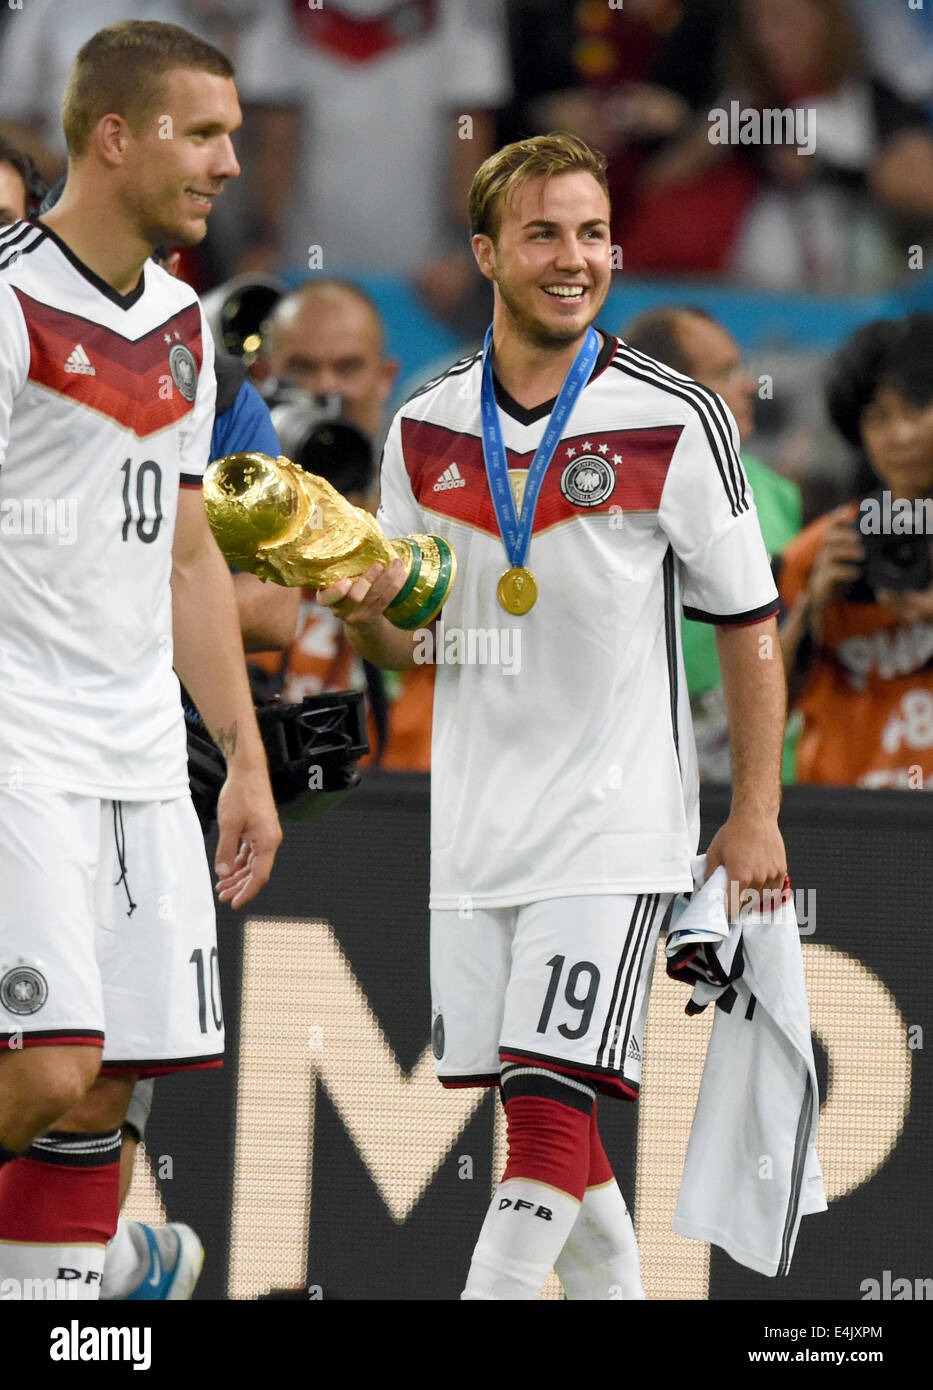 Rio de Janeiro, Brazil. 13th July, 2014. Mario Goetze (R) of Germany holds the World Cup trophy next to Lukas Podolski (L) after winning the FIFA World Cup 2014 final soccer match between Germany and Argentina at the Estadio do Maracana in Rio de Janeiro, Brazil, 13 July 2014. Photo: Marcus Brandt/dpa/Alamy Live News Stock Photo